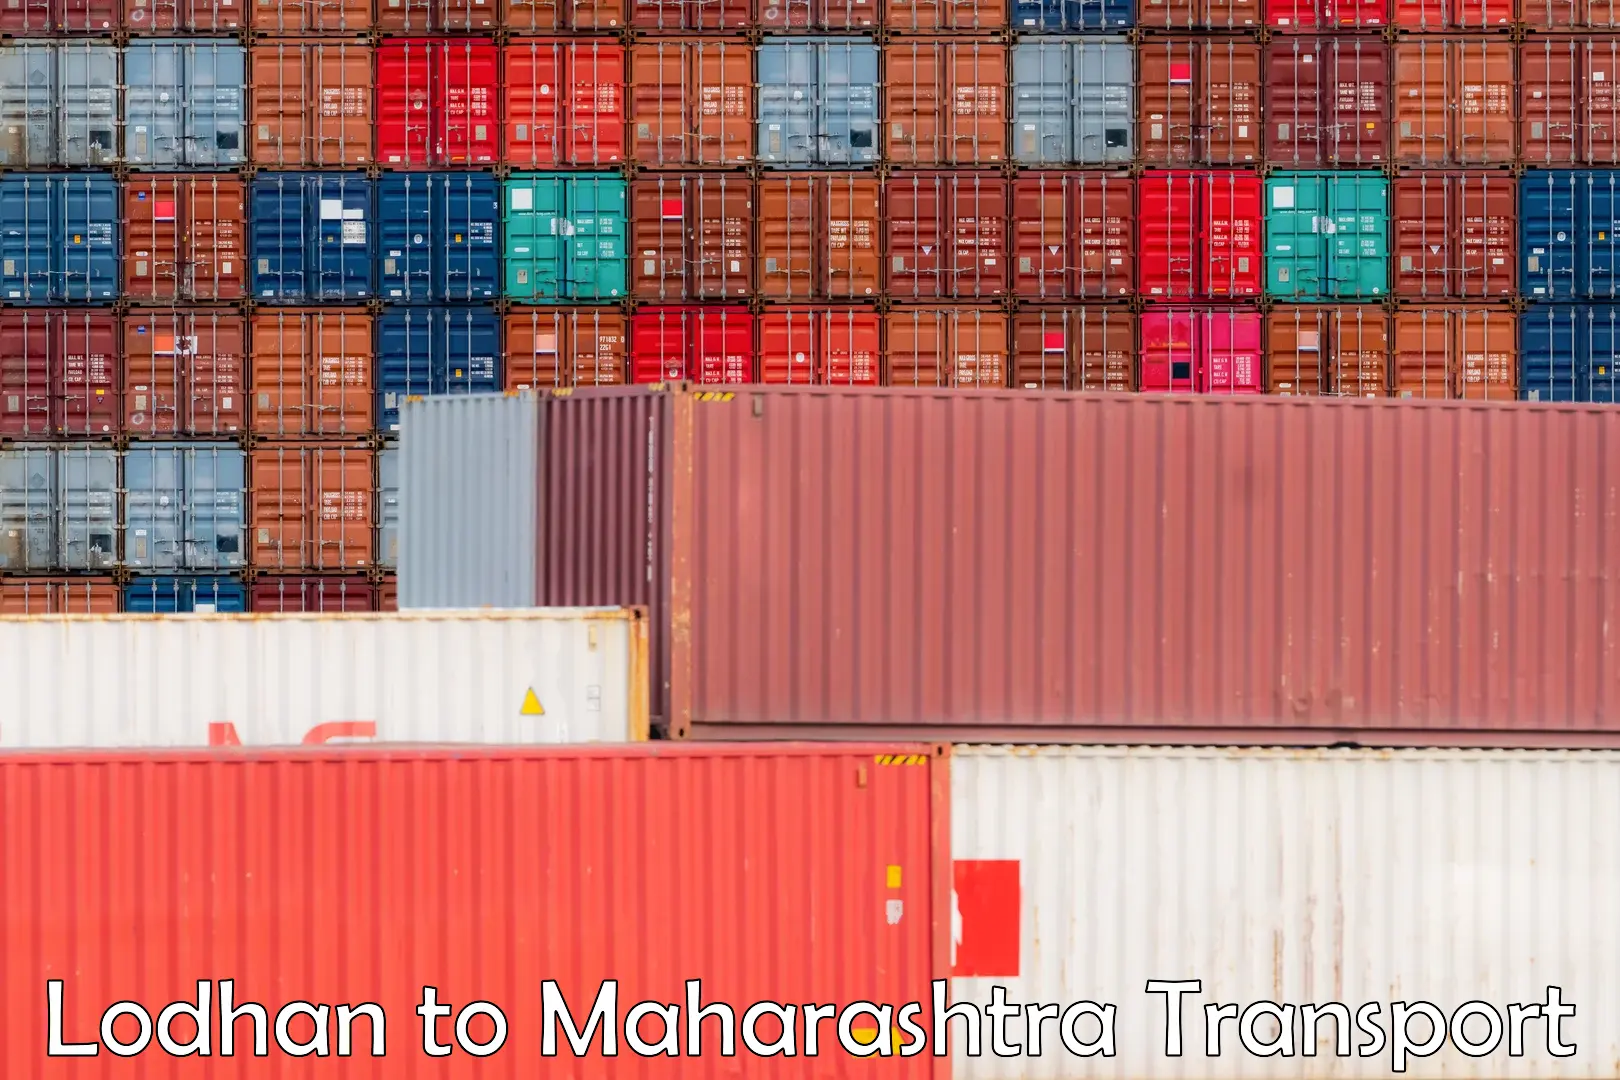 Container transportation services Lodhan to Thane